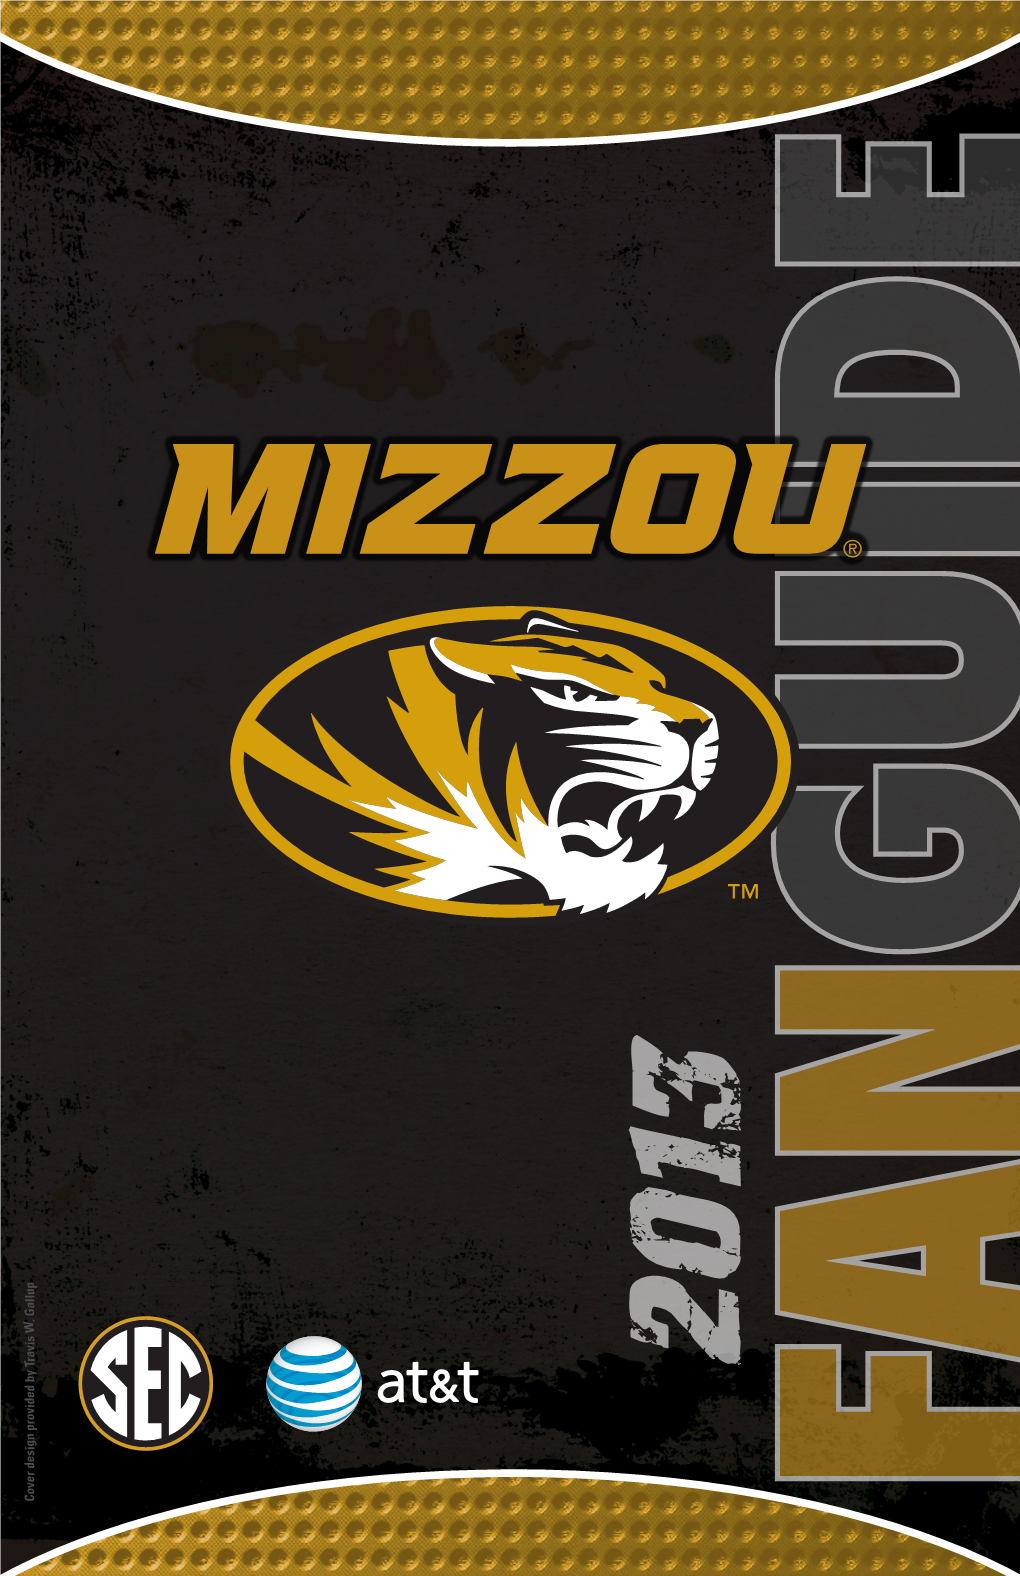 FANGUIDE MURRY STATE TABLE of CONTENTS Saturday, August 31St 2013 Mizzou Football Schedule